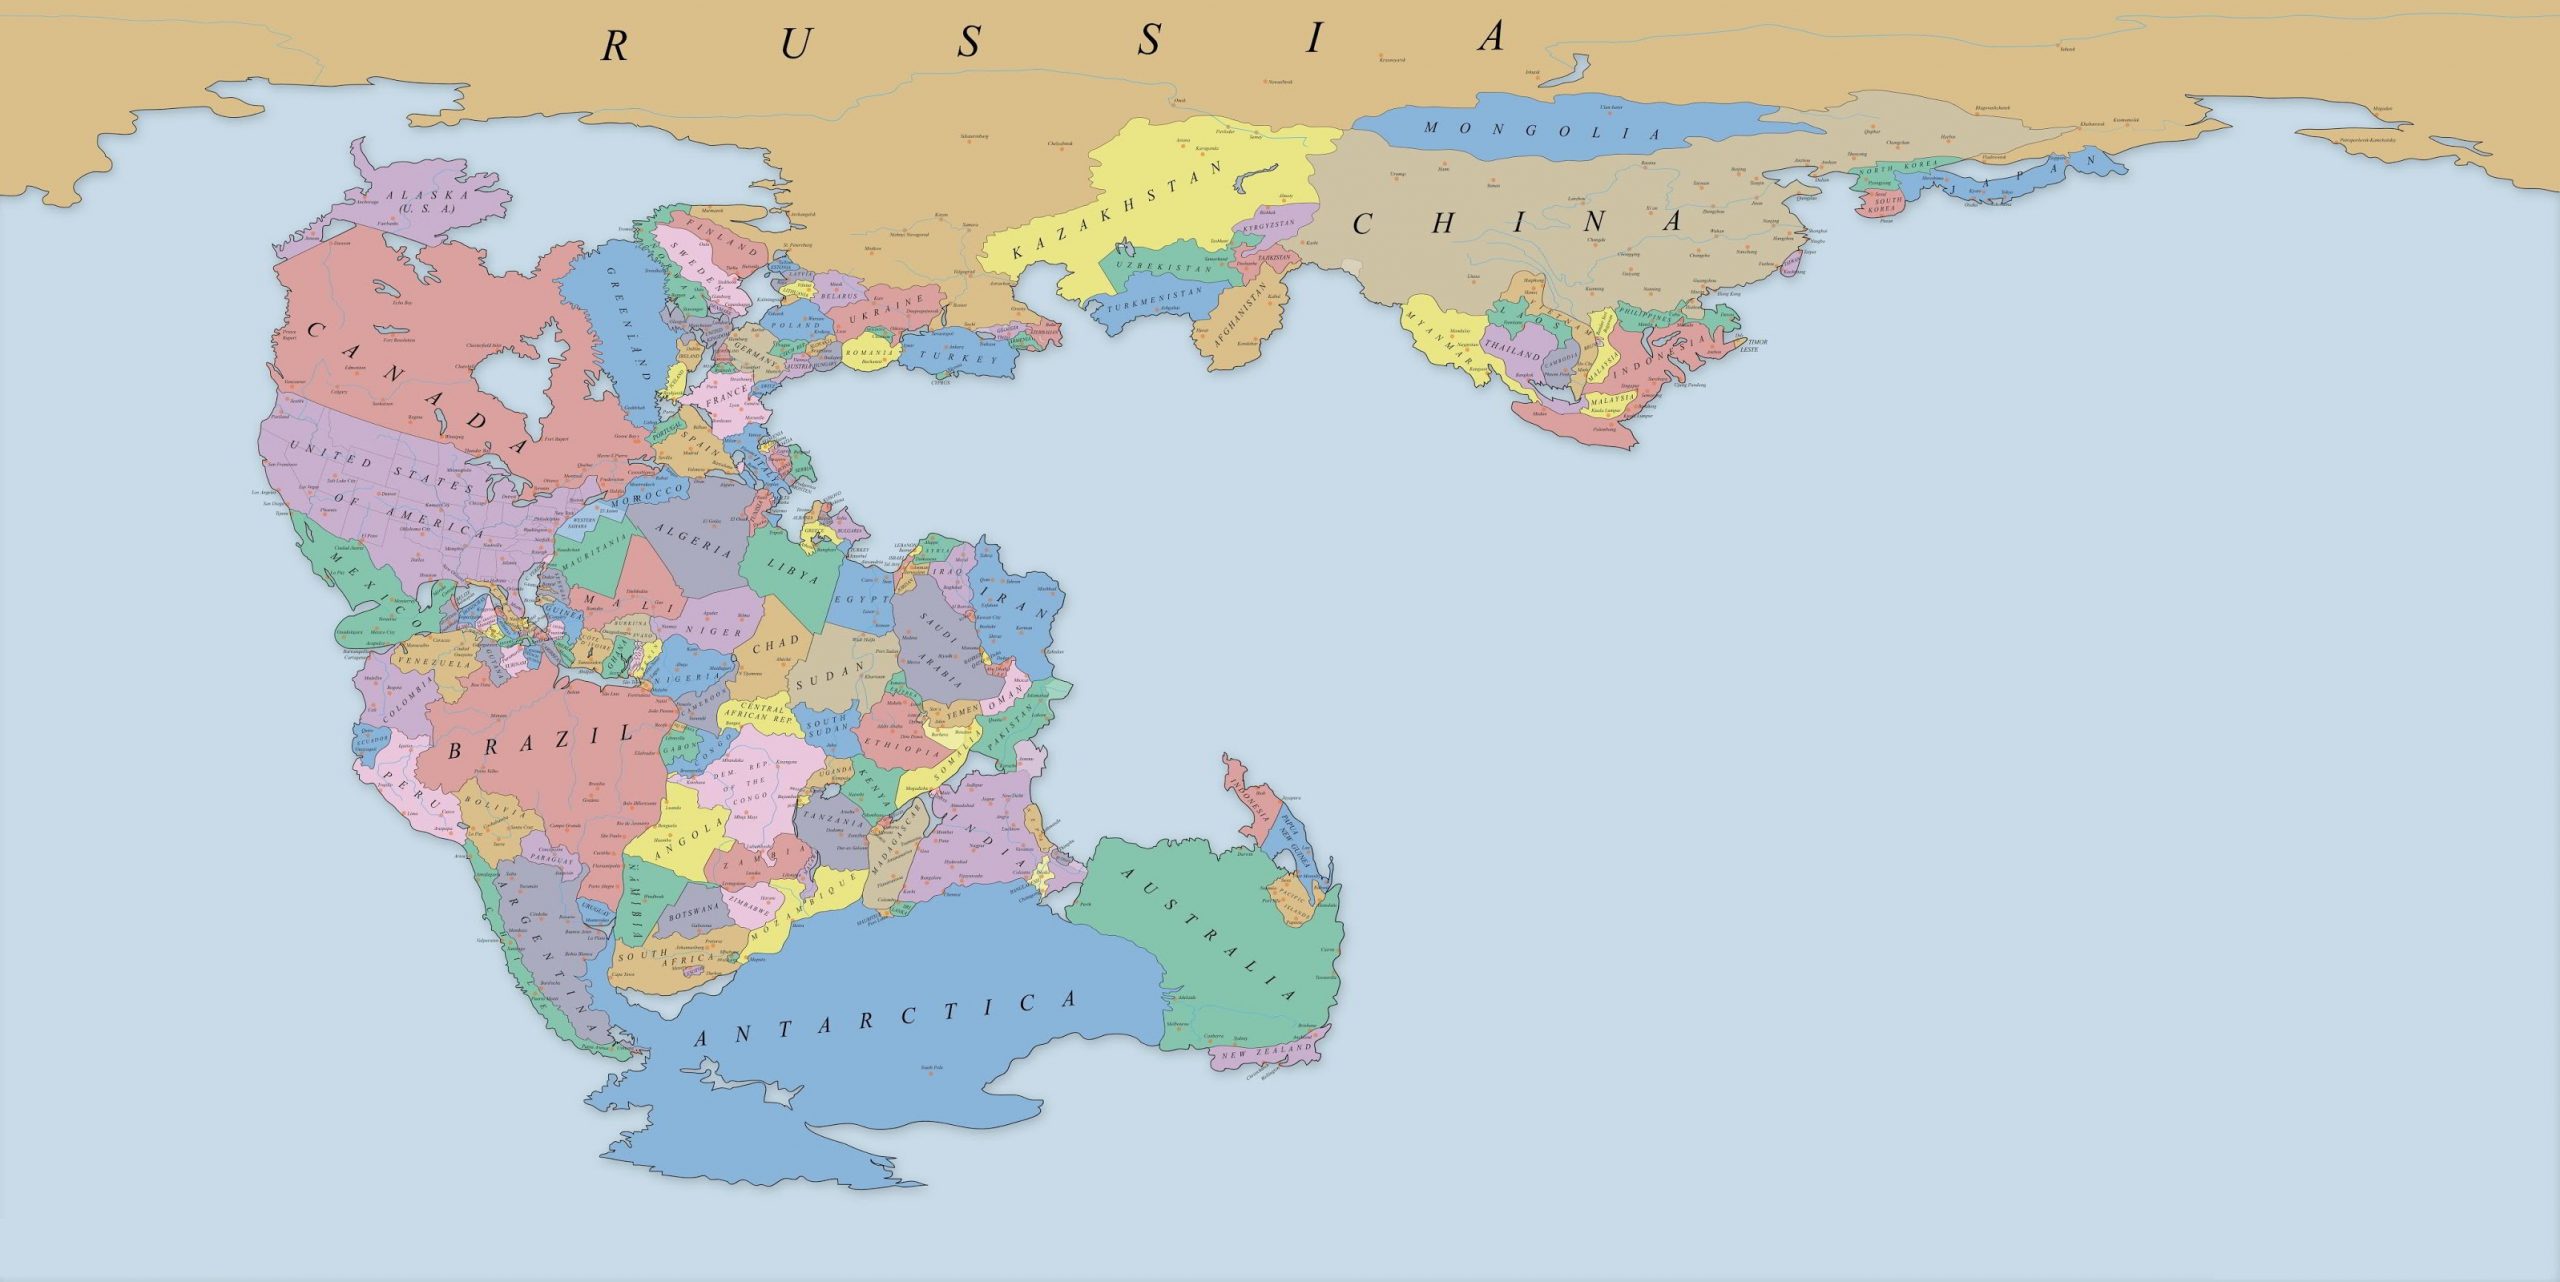 pangea-political-map-high-res-scaled.jpg